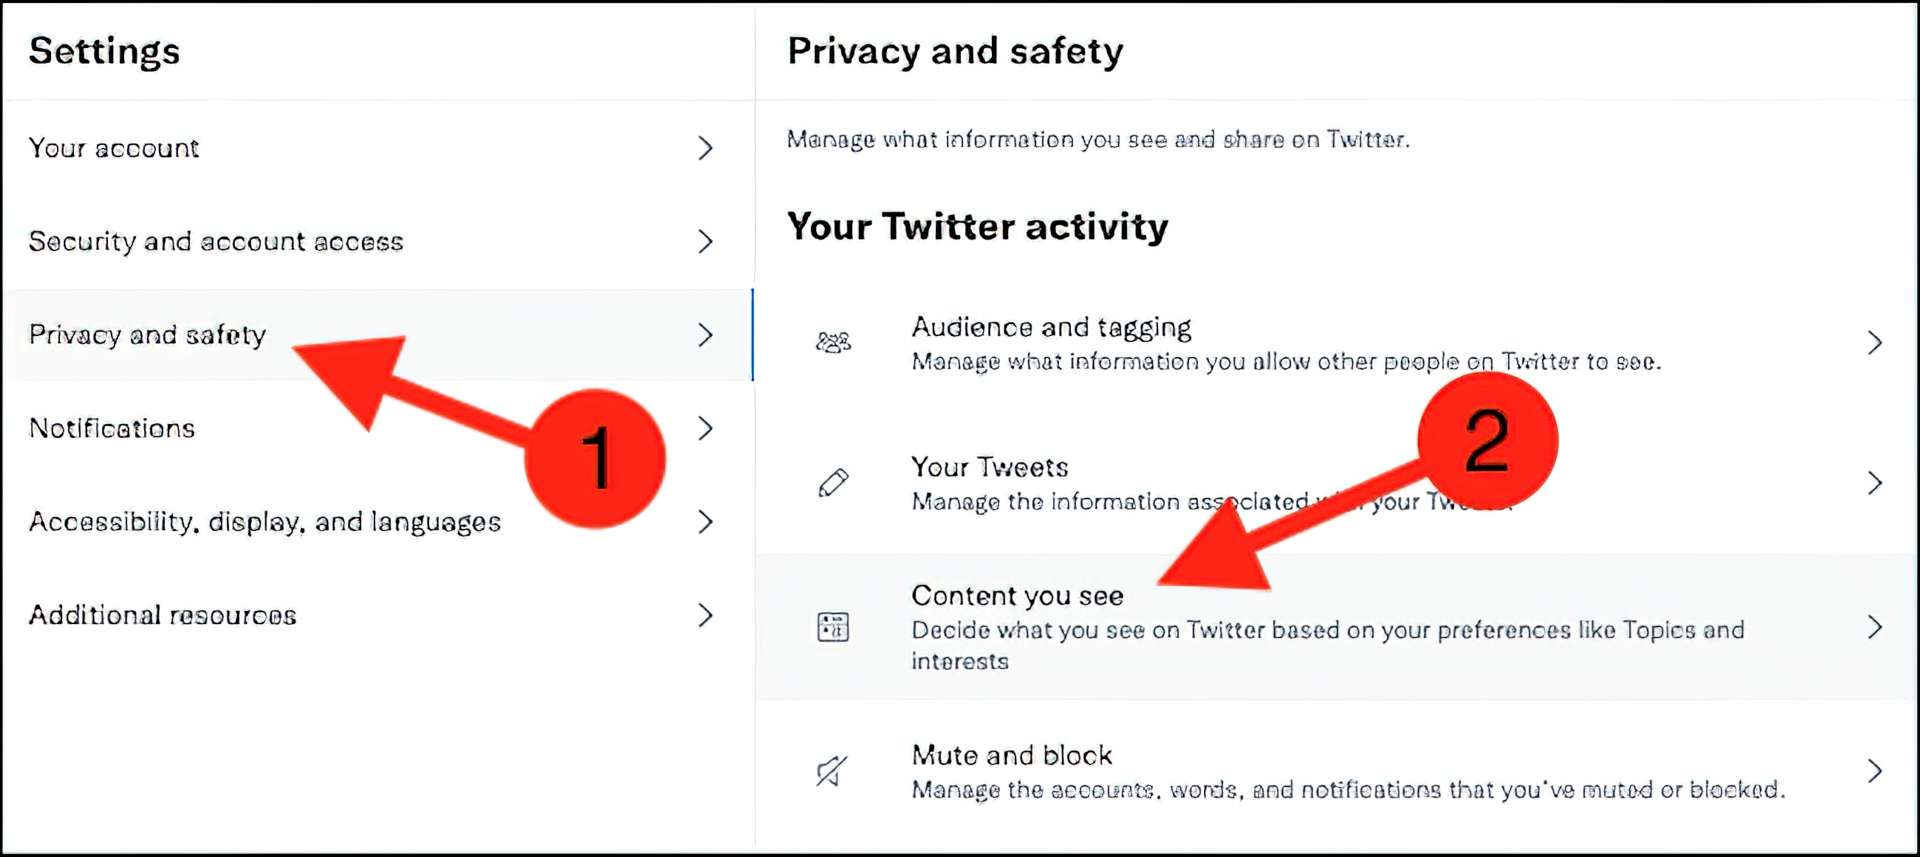 How to allow sensitive content on Twitter?